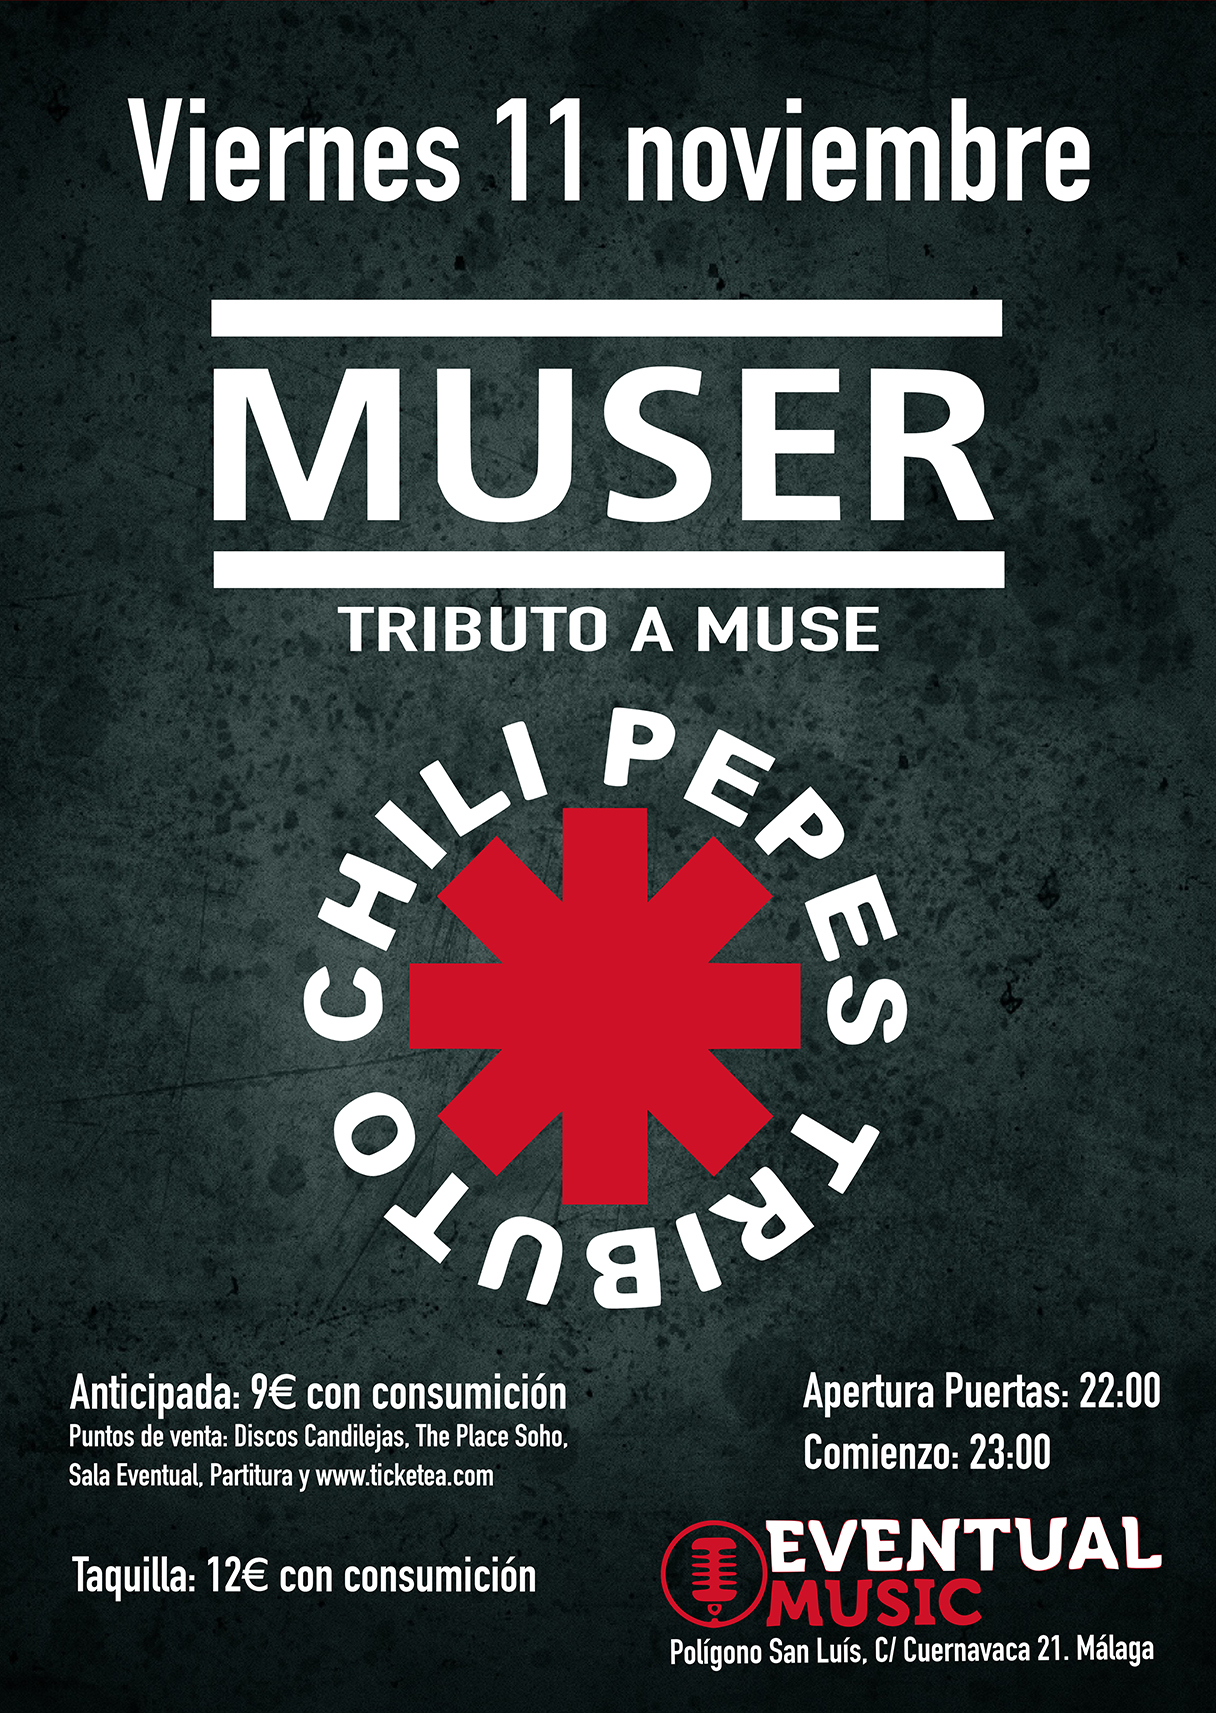 MUSE + RED HOT CHI PEPPERS COVERS ( Muser + Chili pepes tributo )